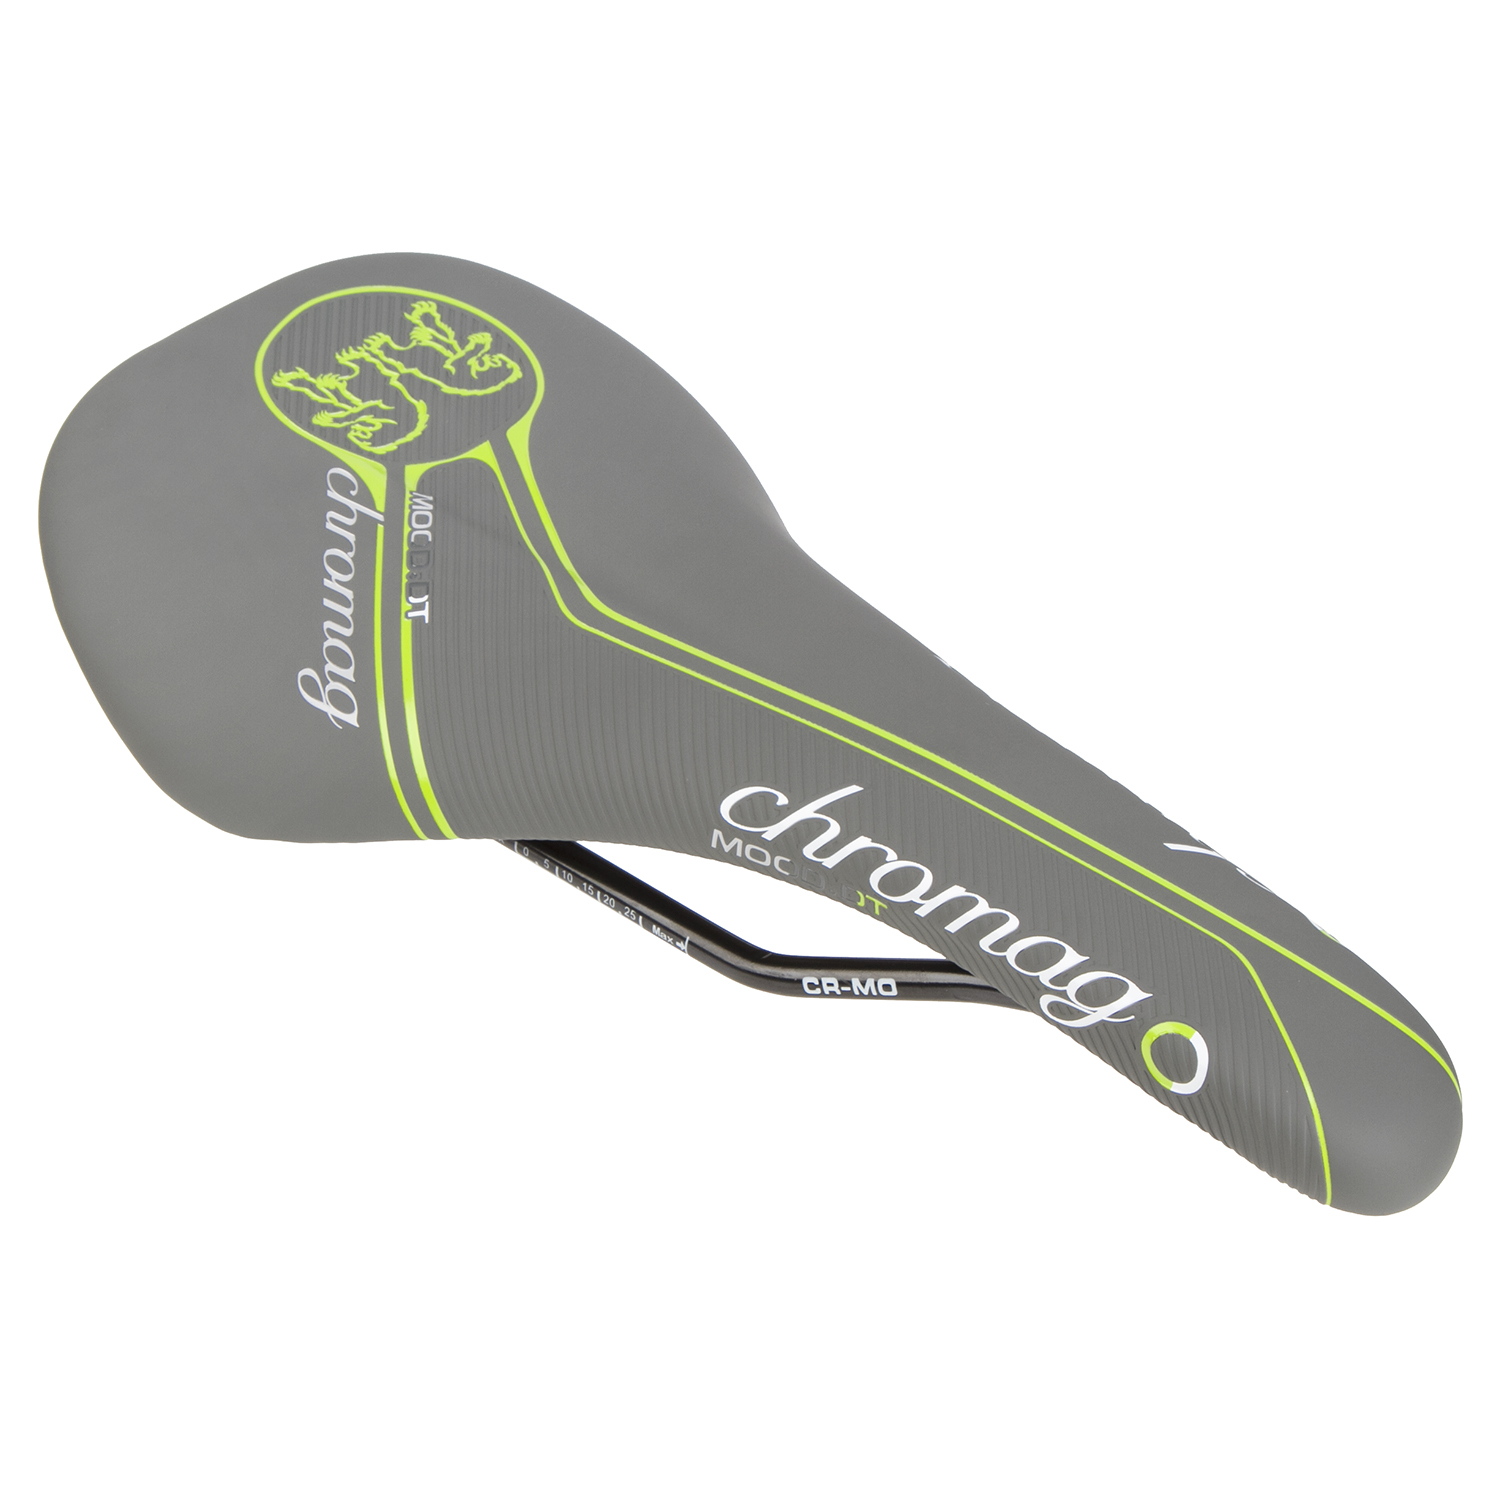 Chromag Selle Mood DT 280 x 135 mm, Gray/Tight Green